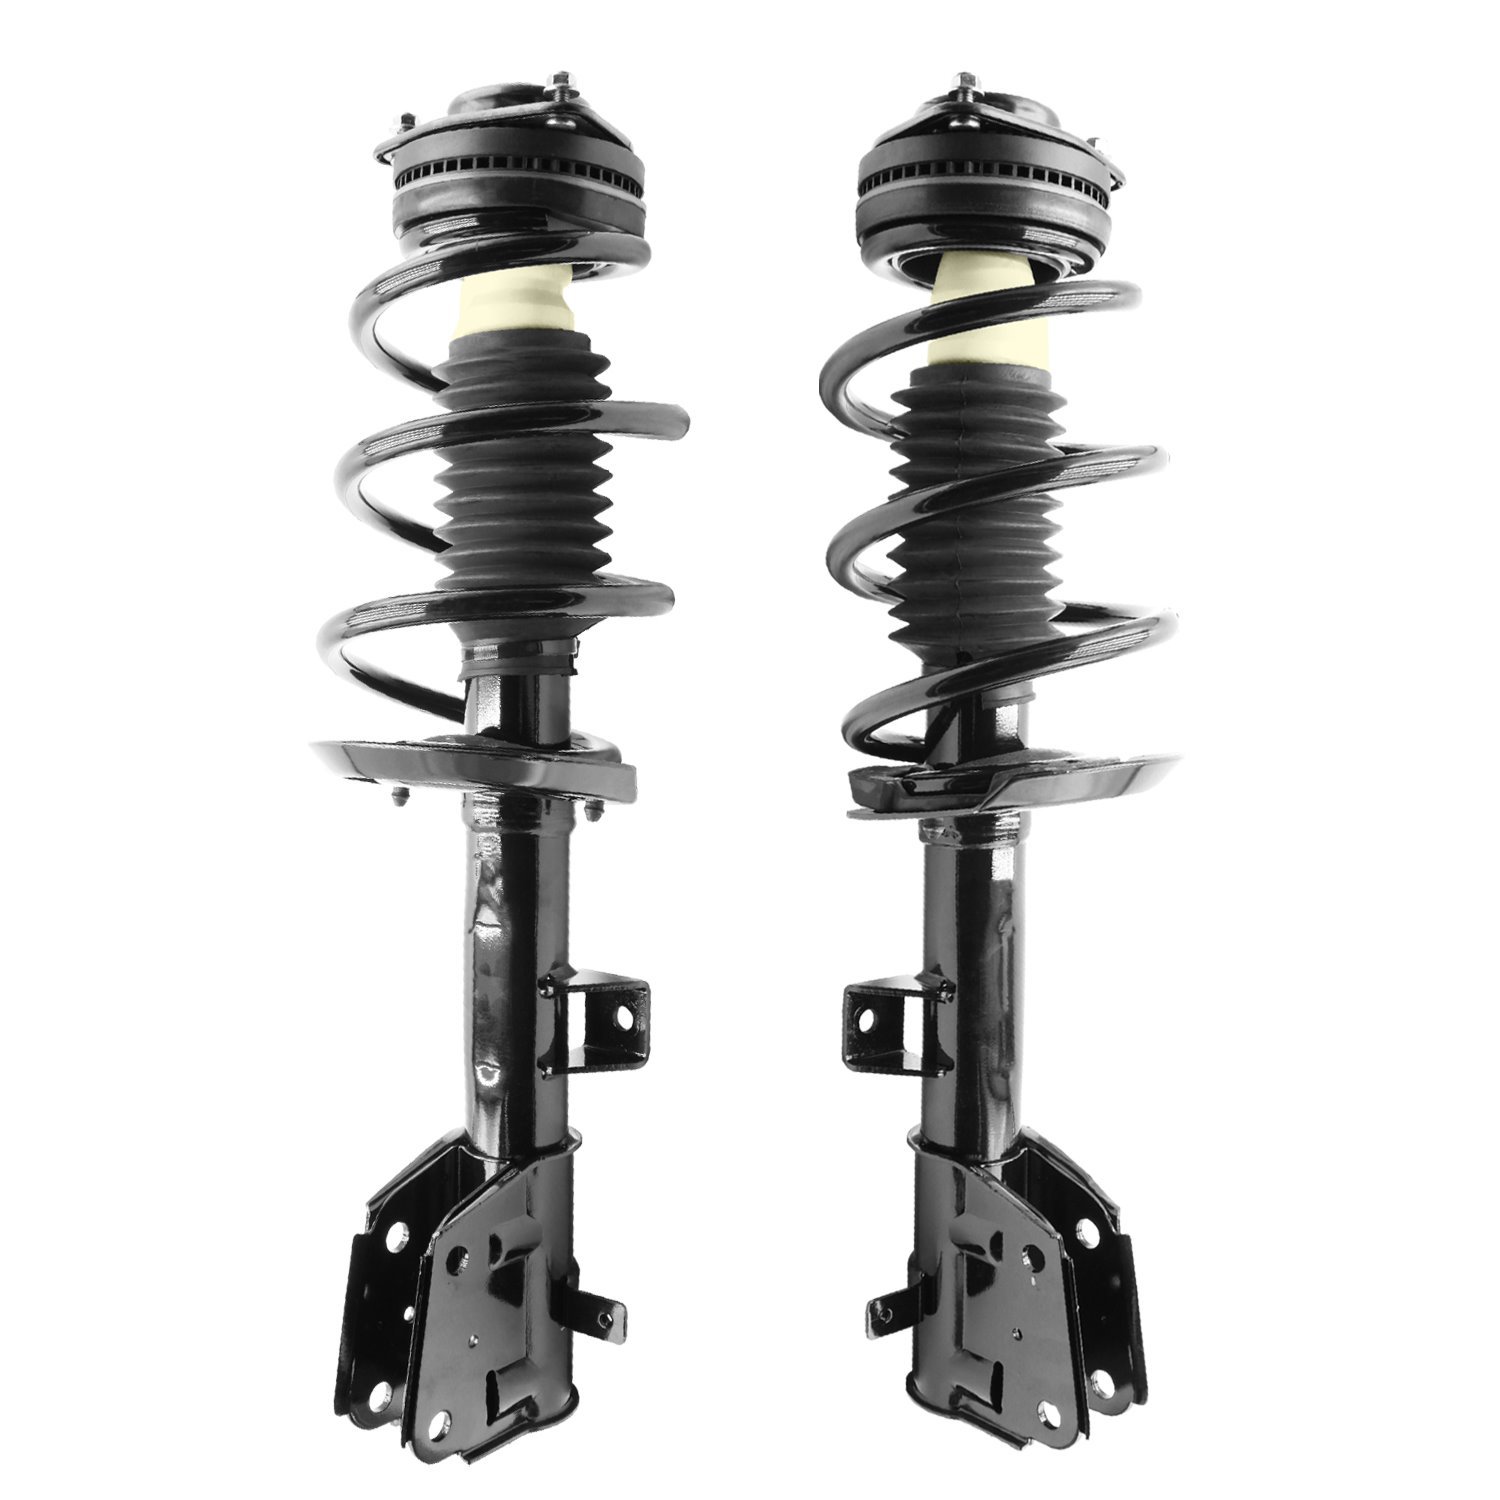 2-13681-13682-001 Front Suspension Strut & Coil Spring Assemby Set Fits Select Chrysler Pacifica